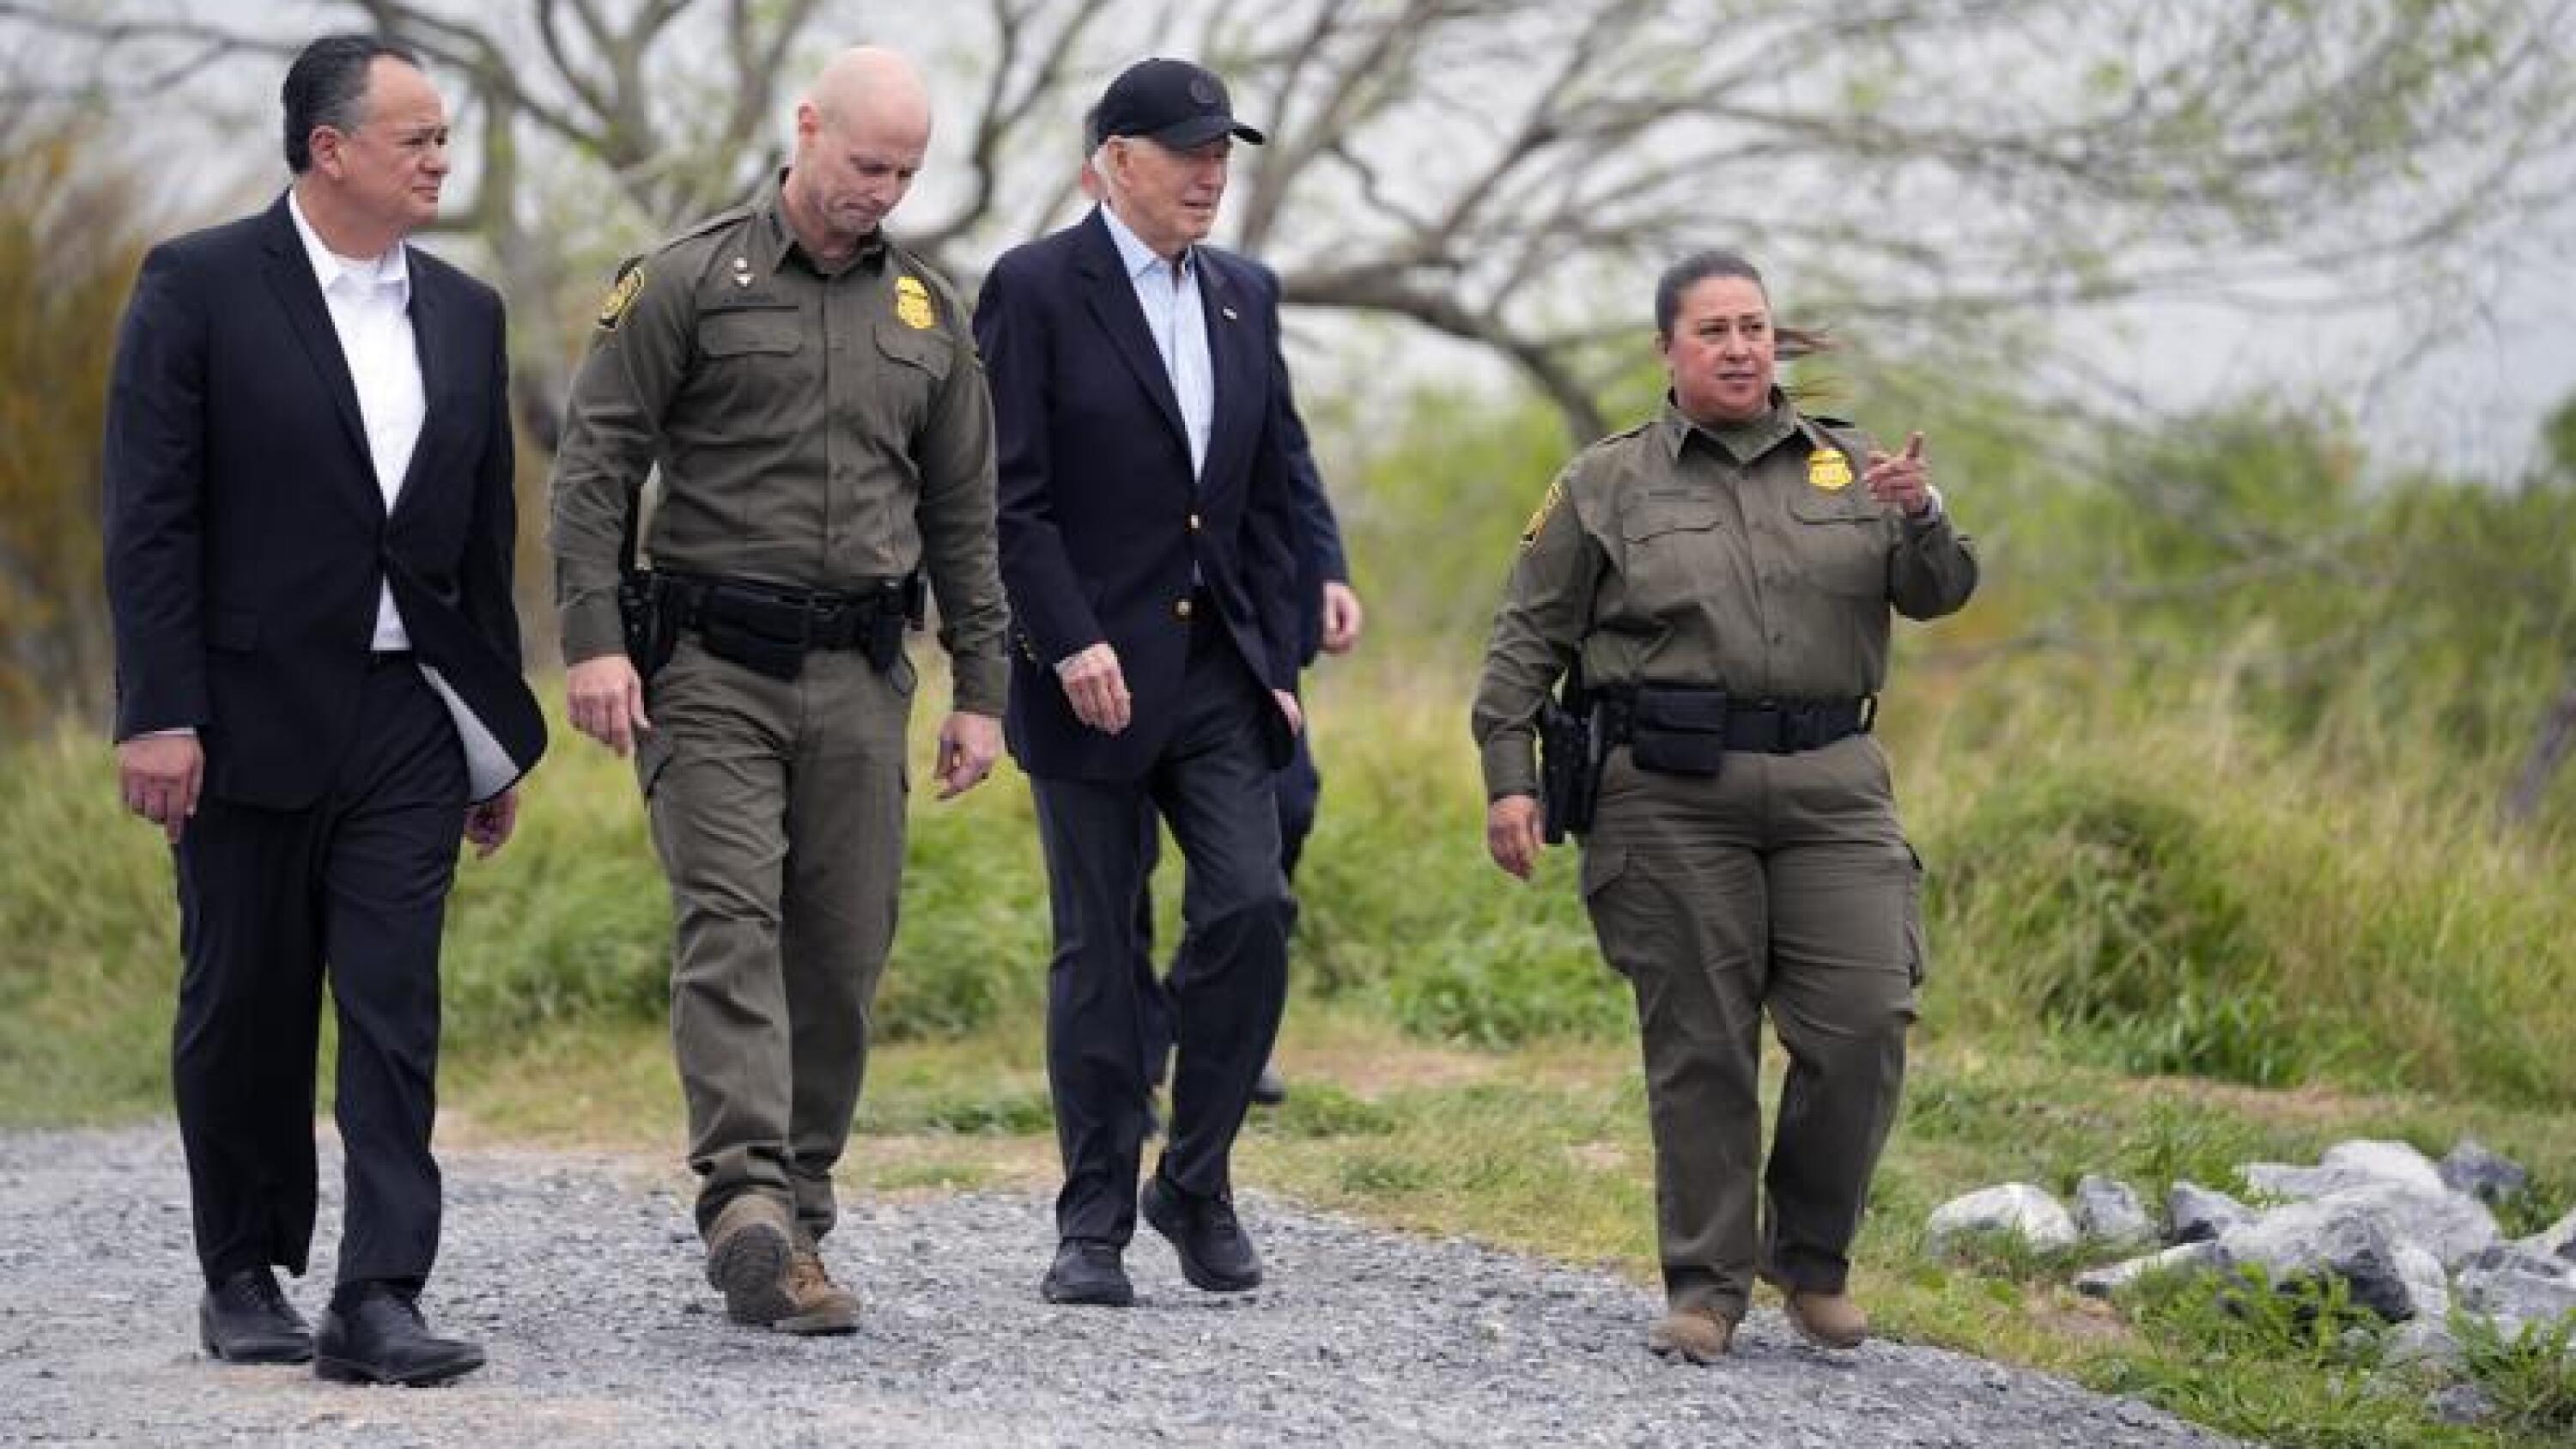 In Texas, Biden and Trump try to use immigration to gain election advantage